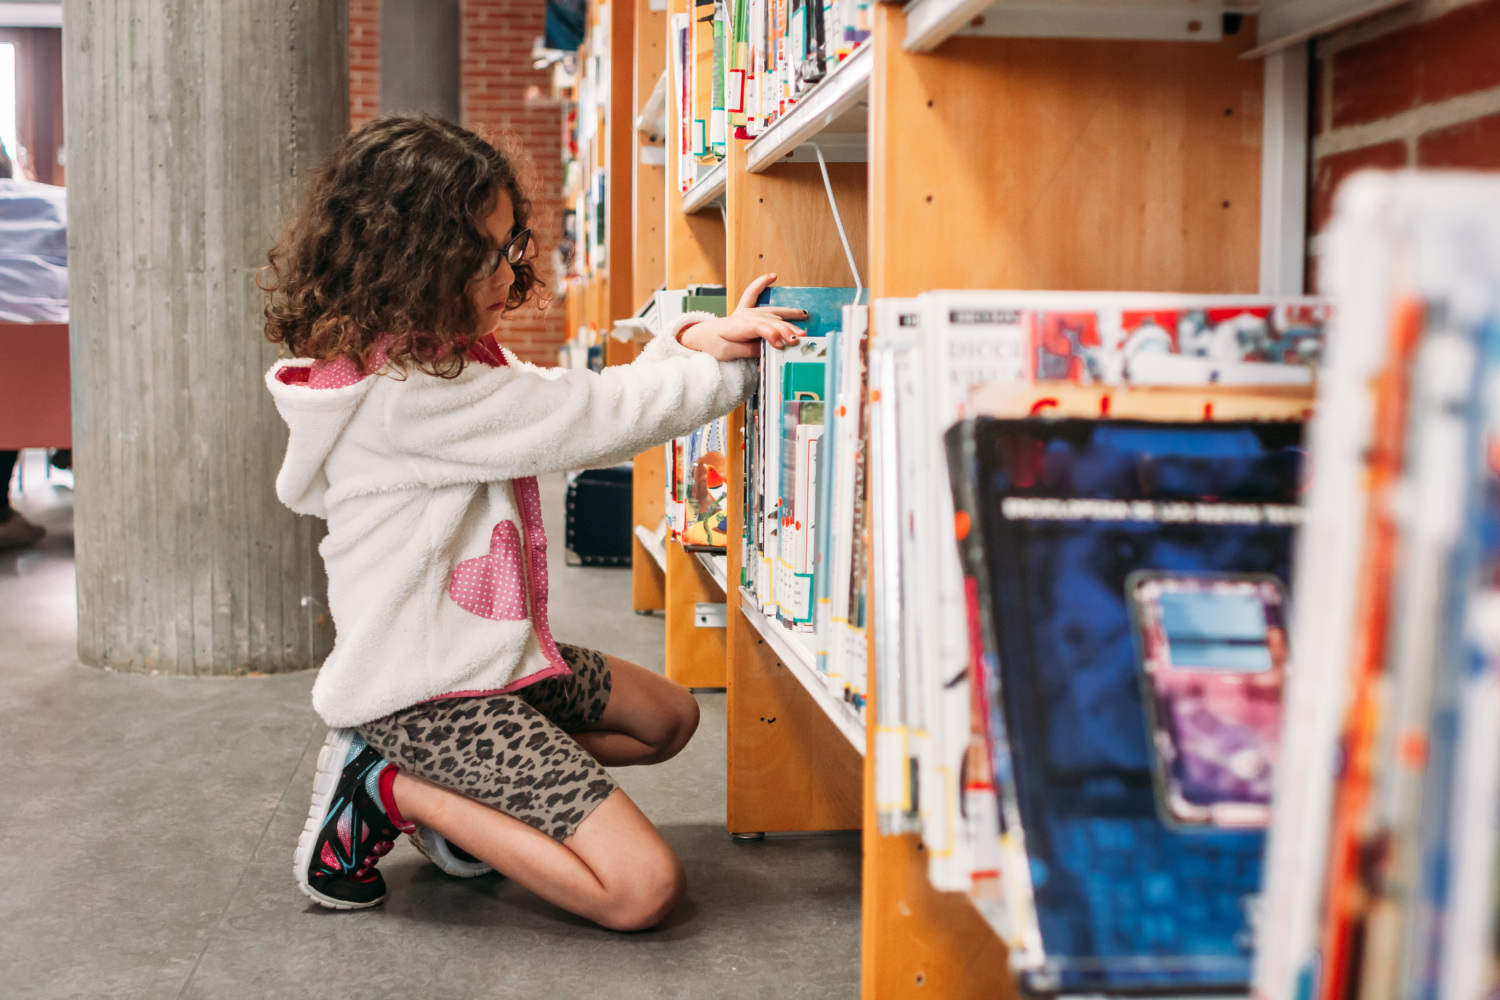 Child searching for books at a library